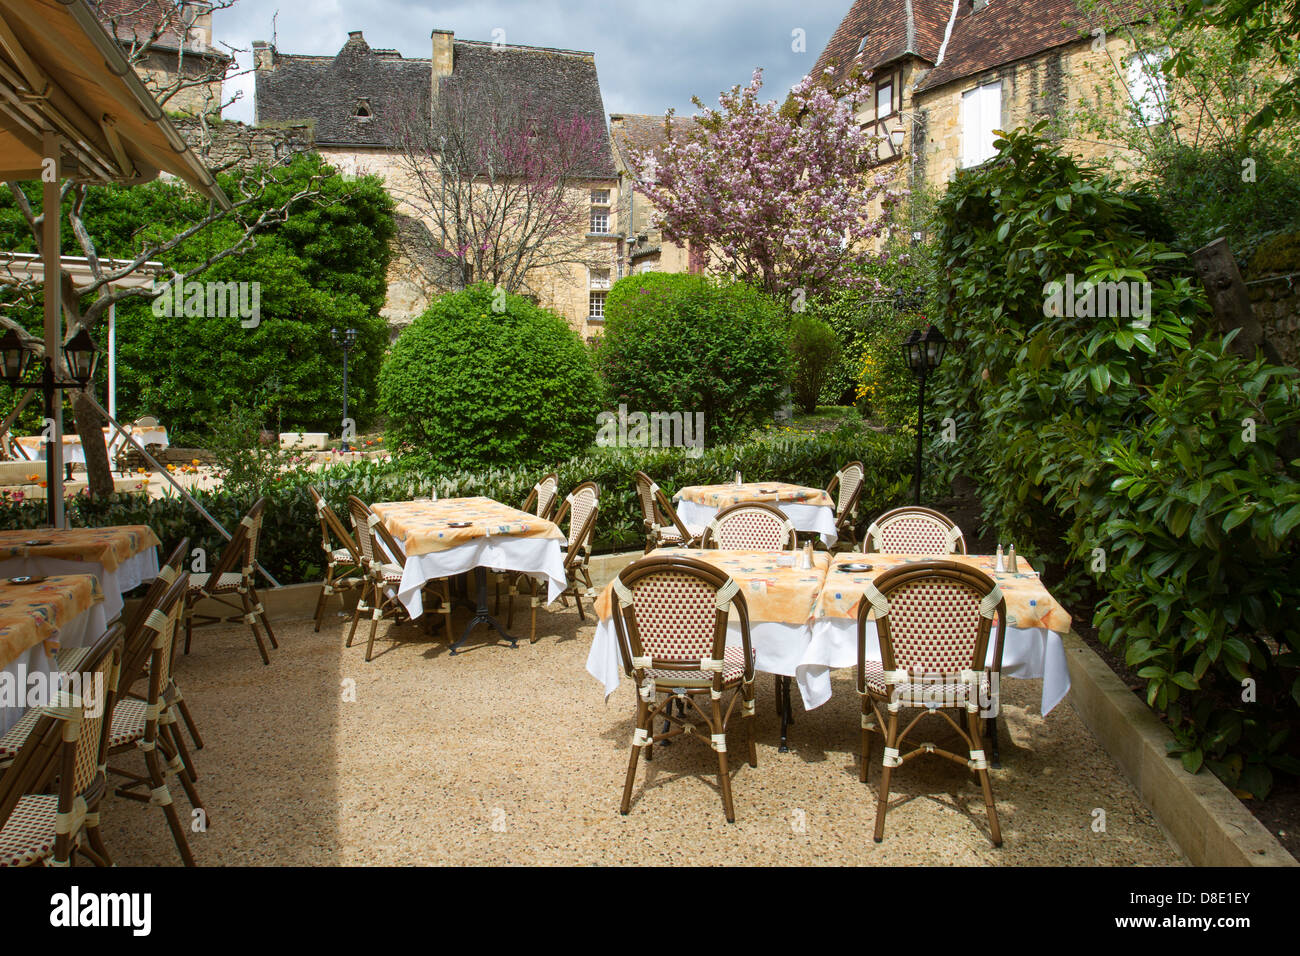 Outdoor courtyard dining at a restaurant by medieval sandstone buildings in charming Sarlat, Dordogne region of France Stock Photo